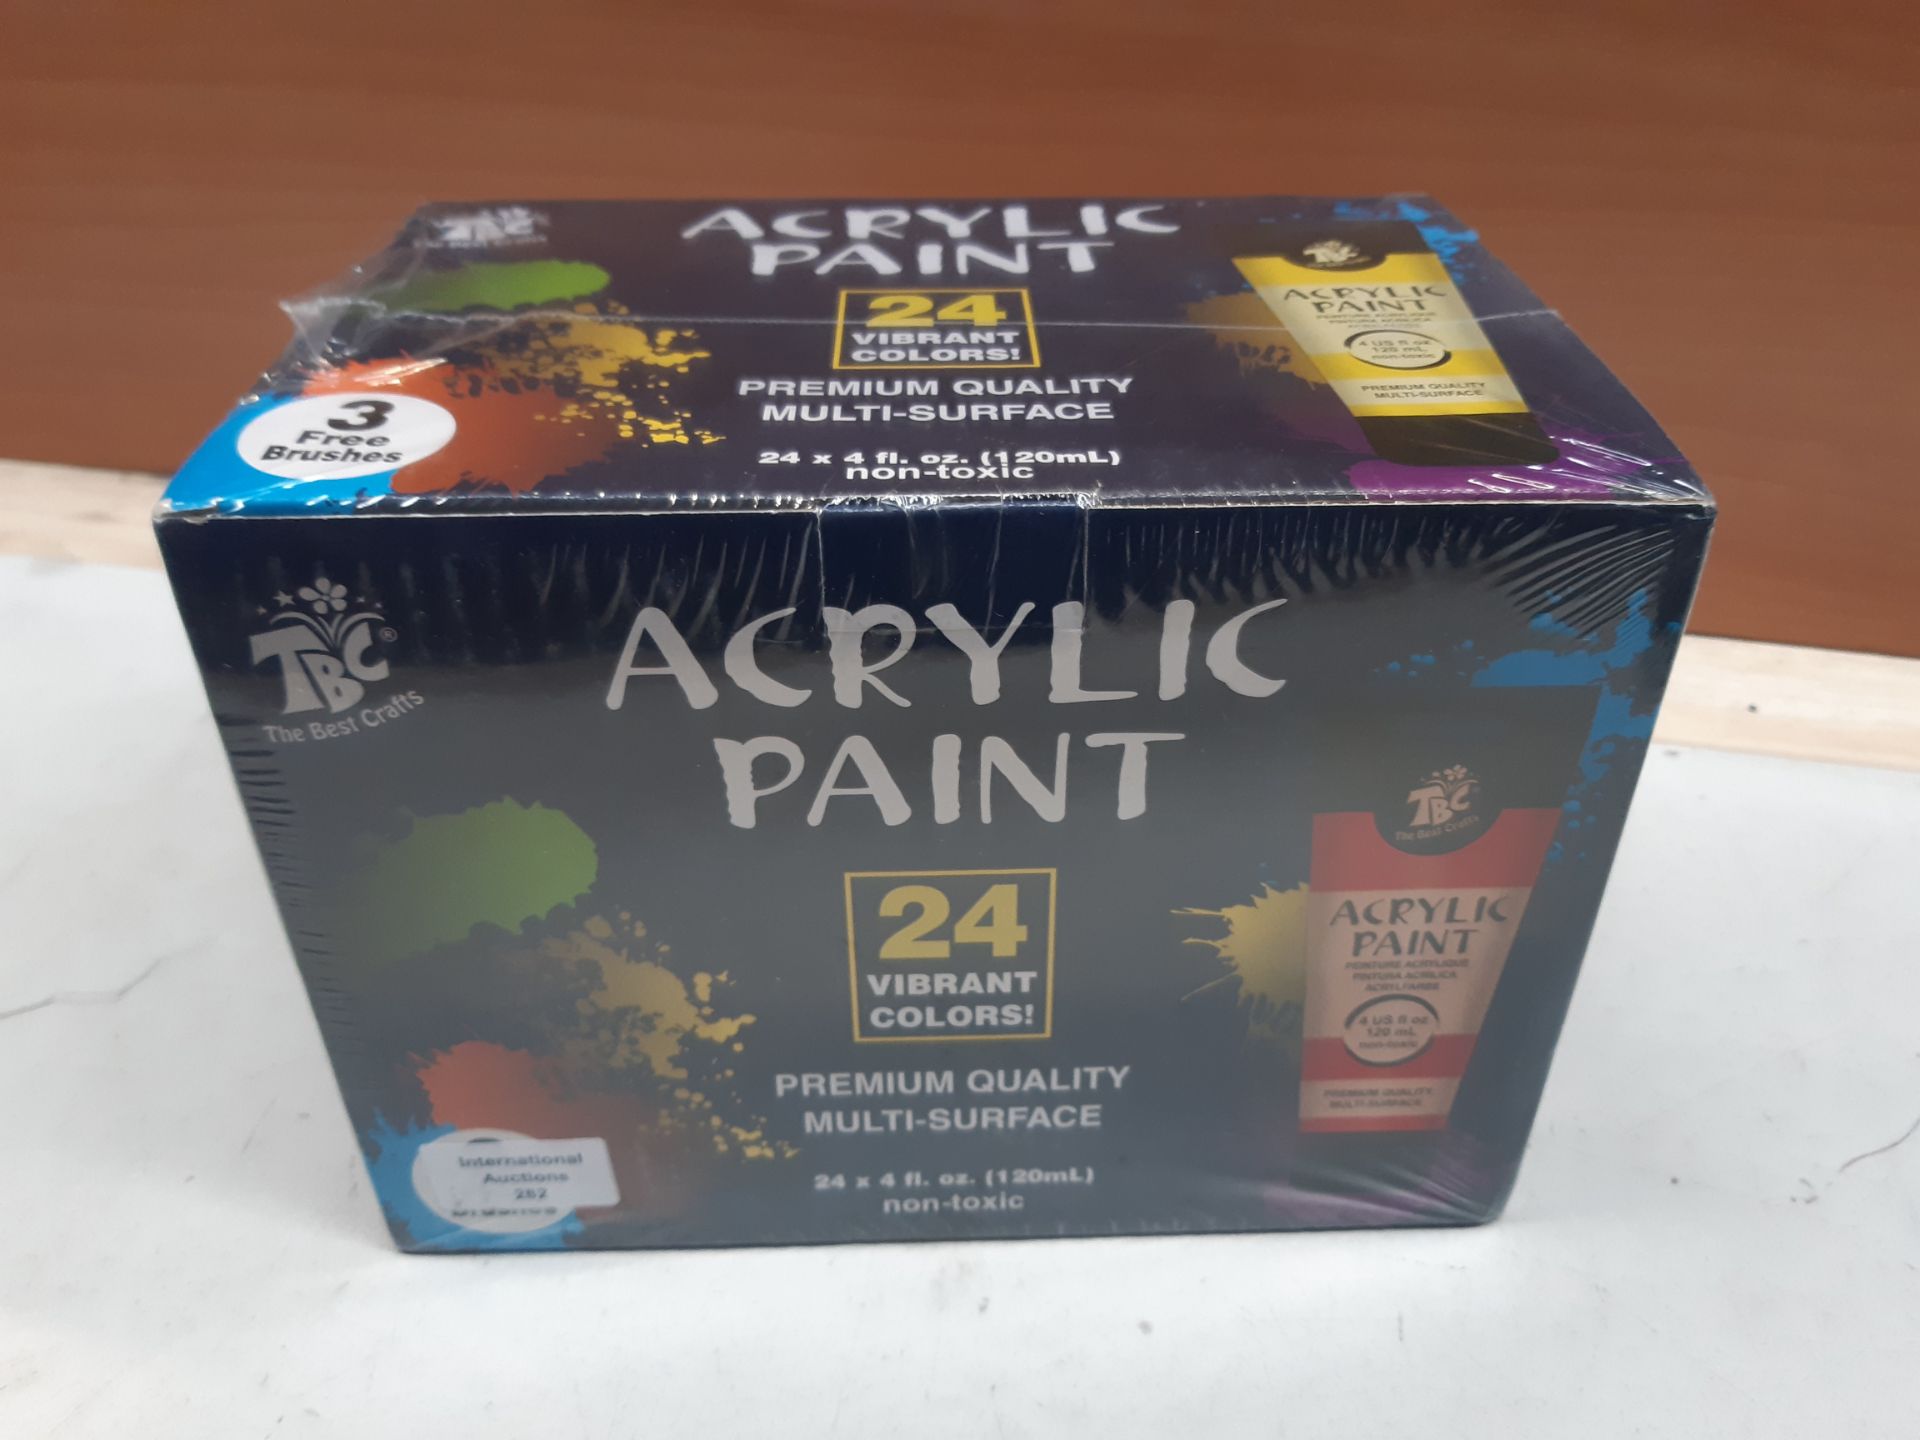 RRP £29.99 TBC The Best Crafts Acrylic Paint - Image 2 of 2